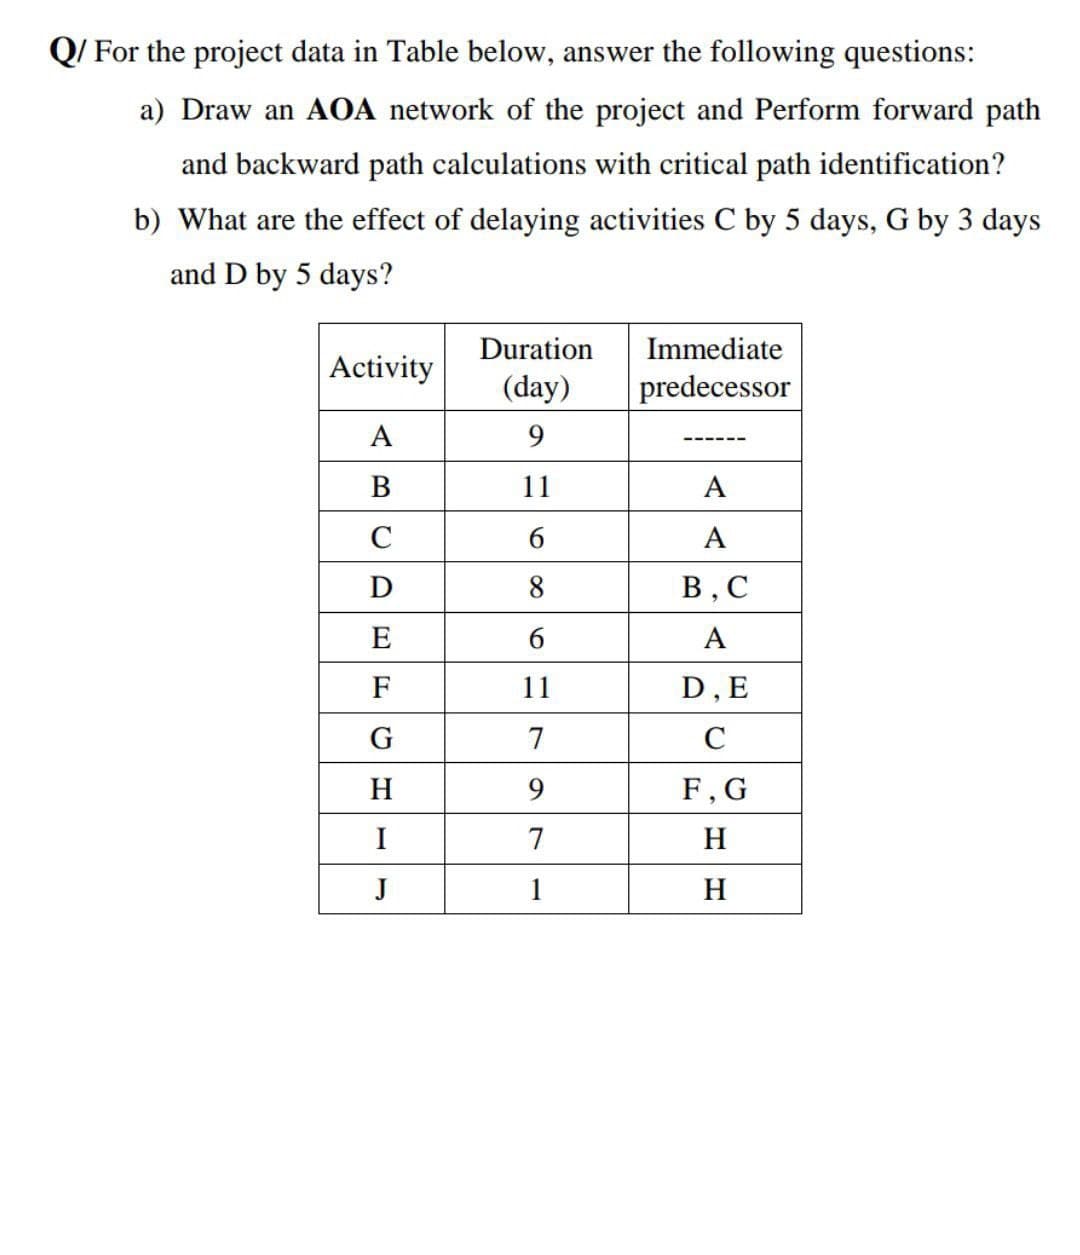 Q/ For the project data in Table below, answer the following questions:
a) Draw an AOA network of the project and Perform forward path
and backward path calculations with critical path identification?
b) What are the effect of delaying activities C by 5 days, G by 3 days
and D by 5 days?
Duration
Immediate
Activity
(day)
predecessor
А
В
11
A
C
A
D
8
В, С
E
А
F
11
D, E
7
C
H
F, G
I
7
H
J
1
H
